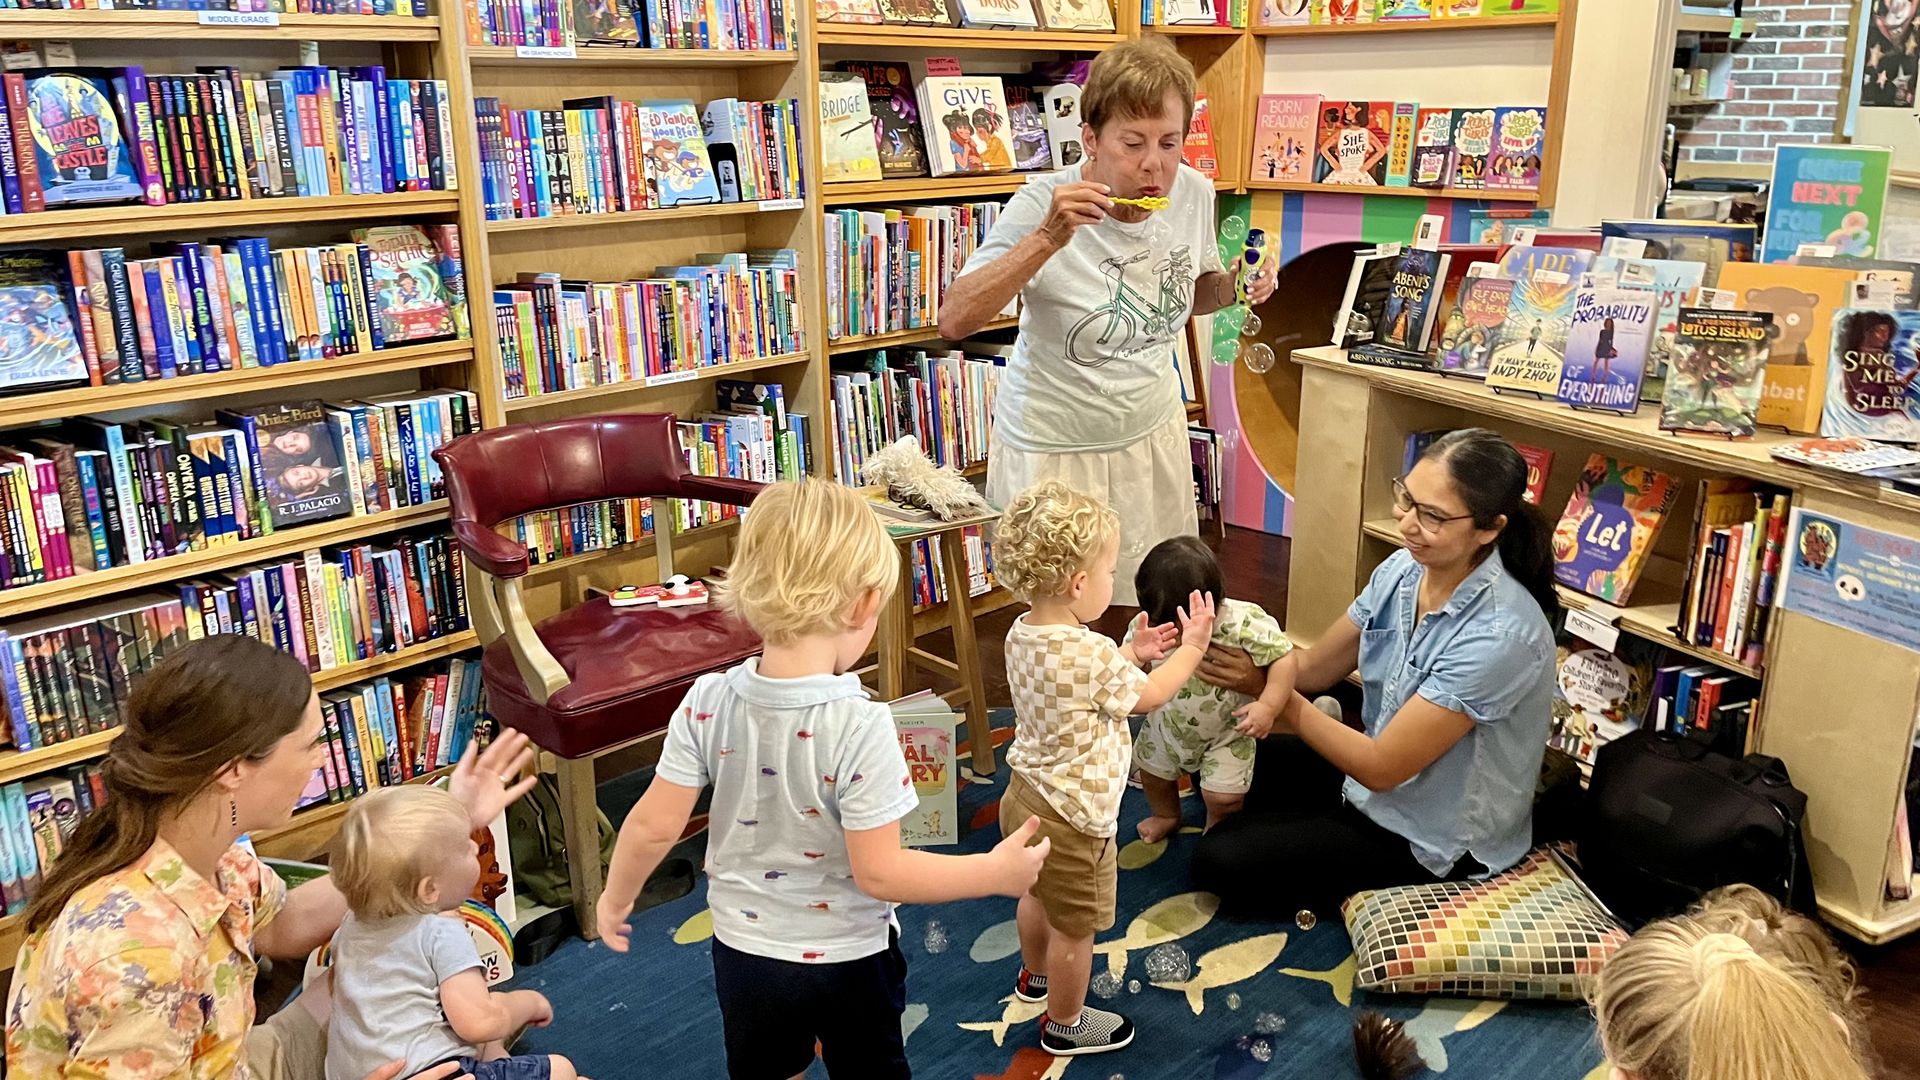 A woman, surrounded by shelves of colorful books, blows bubbles as children crowd around her.